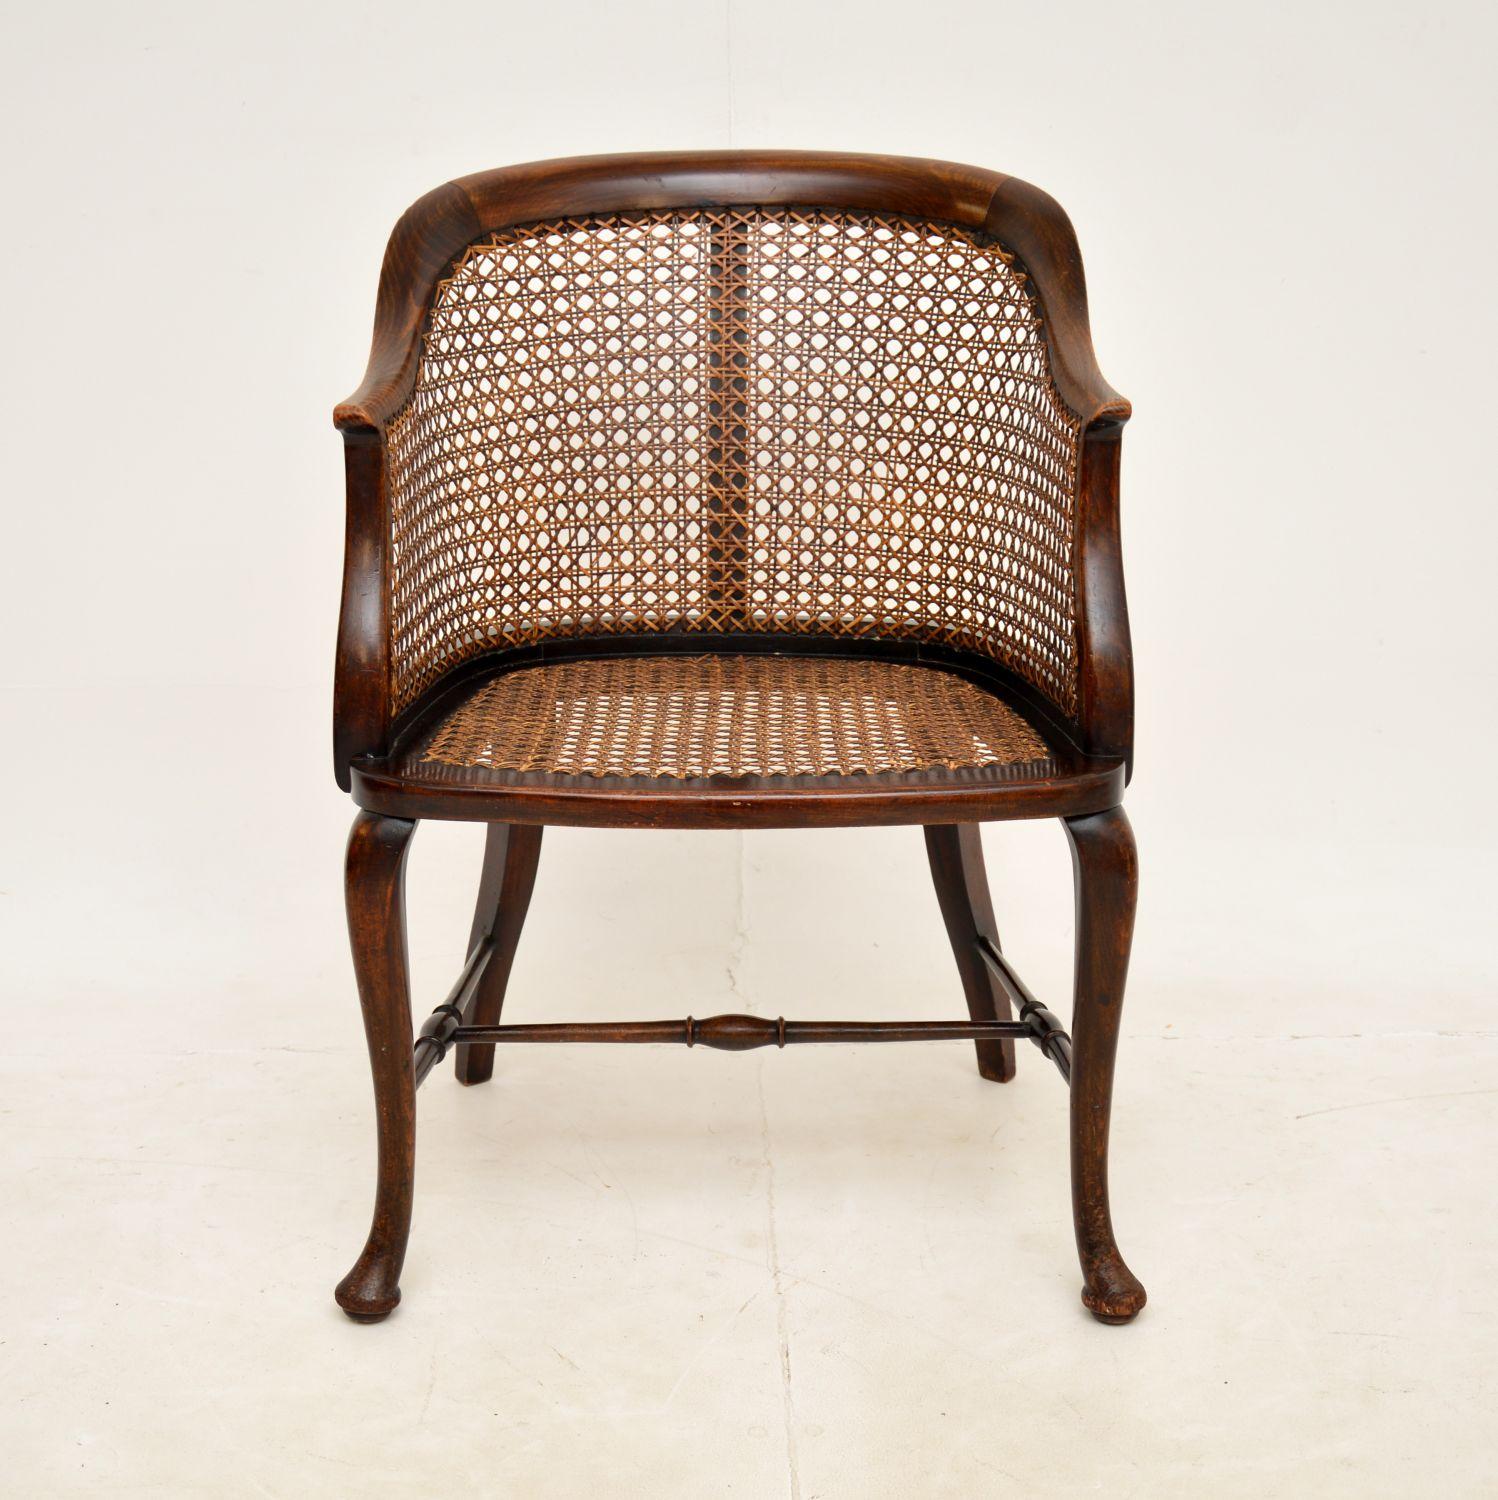 A beautiful and elegant antique side chair in solid beech, with a caned seat and back. This was made in England, it dates from around 1900-1910.

It is of lovely quality with gorgeous curves, the design is elegant yet sturdy. It is quite a petite